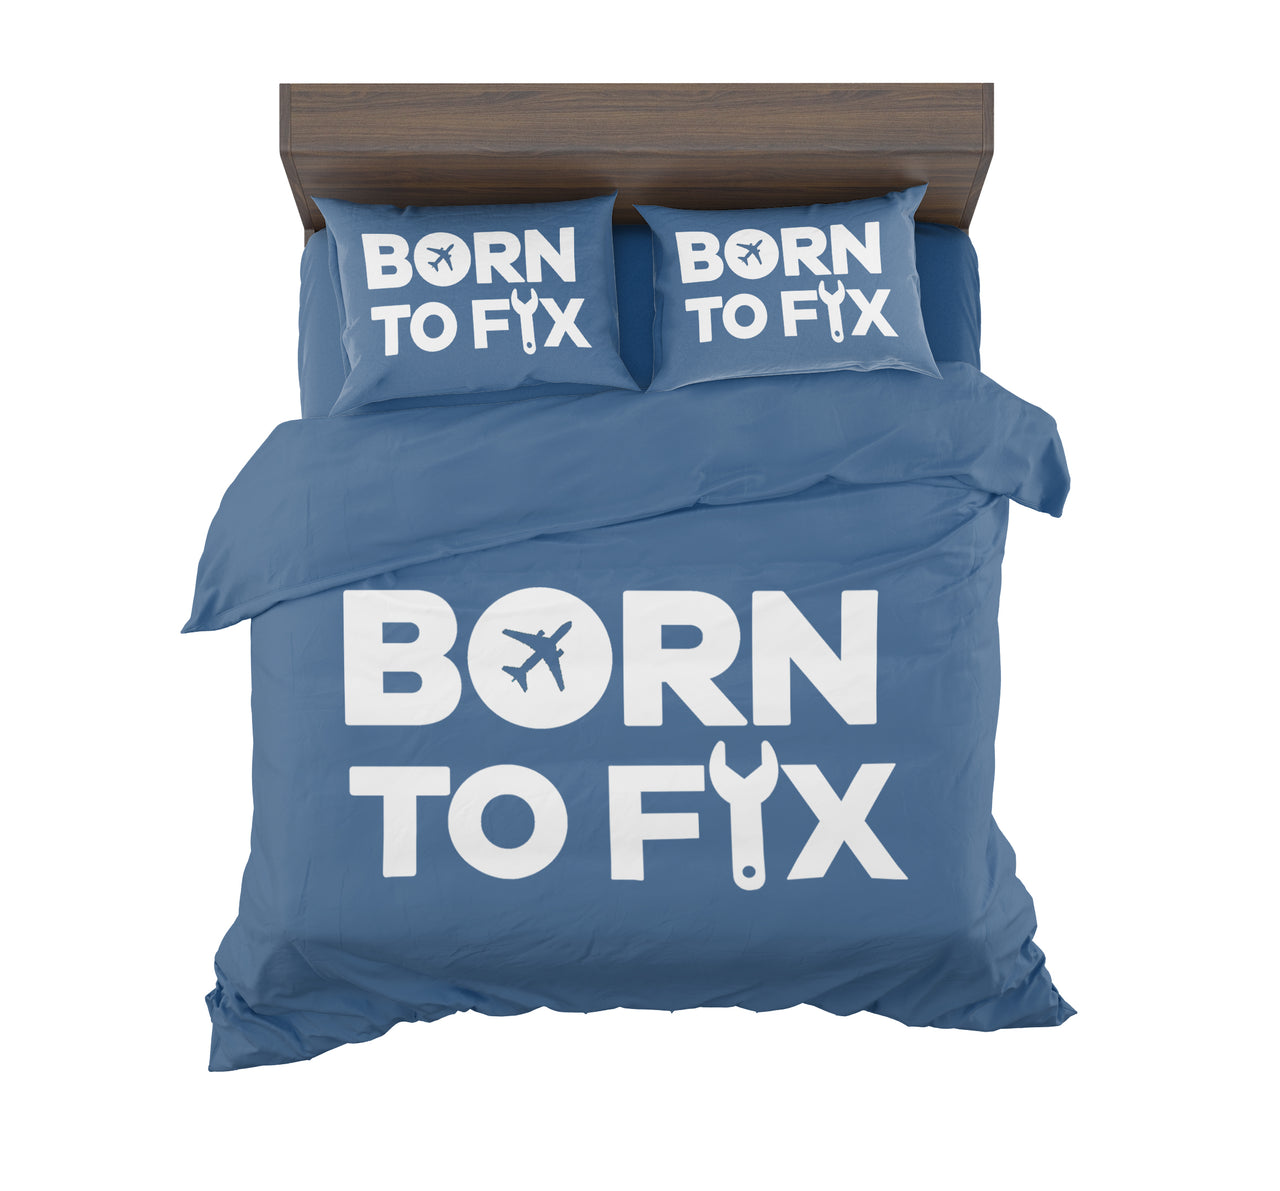 Born To Fix Airplanes Designed Bedding Sets